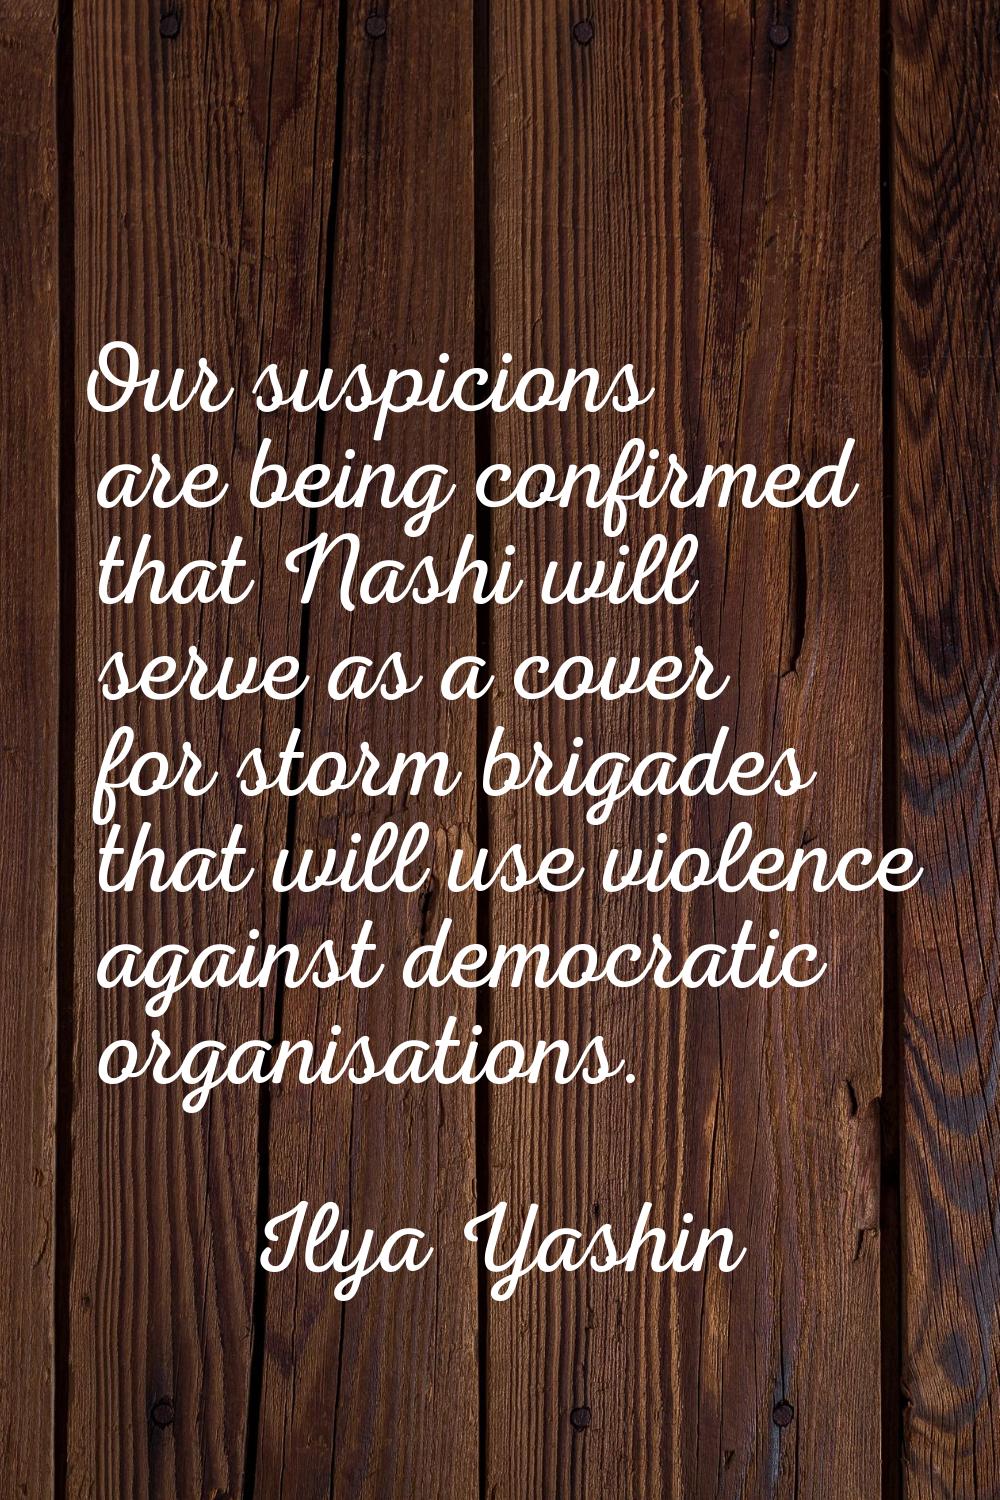 Our suspicions are being confirmed that Nashi will serve as a cover for storm brigades that will us